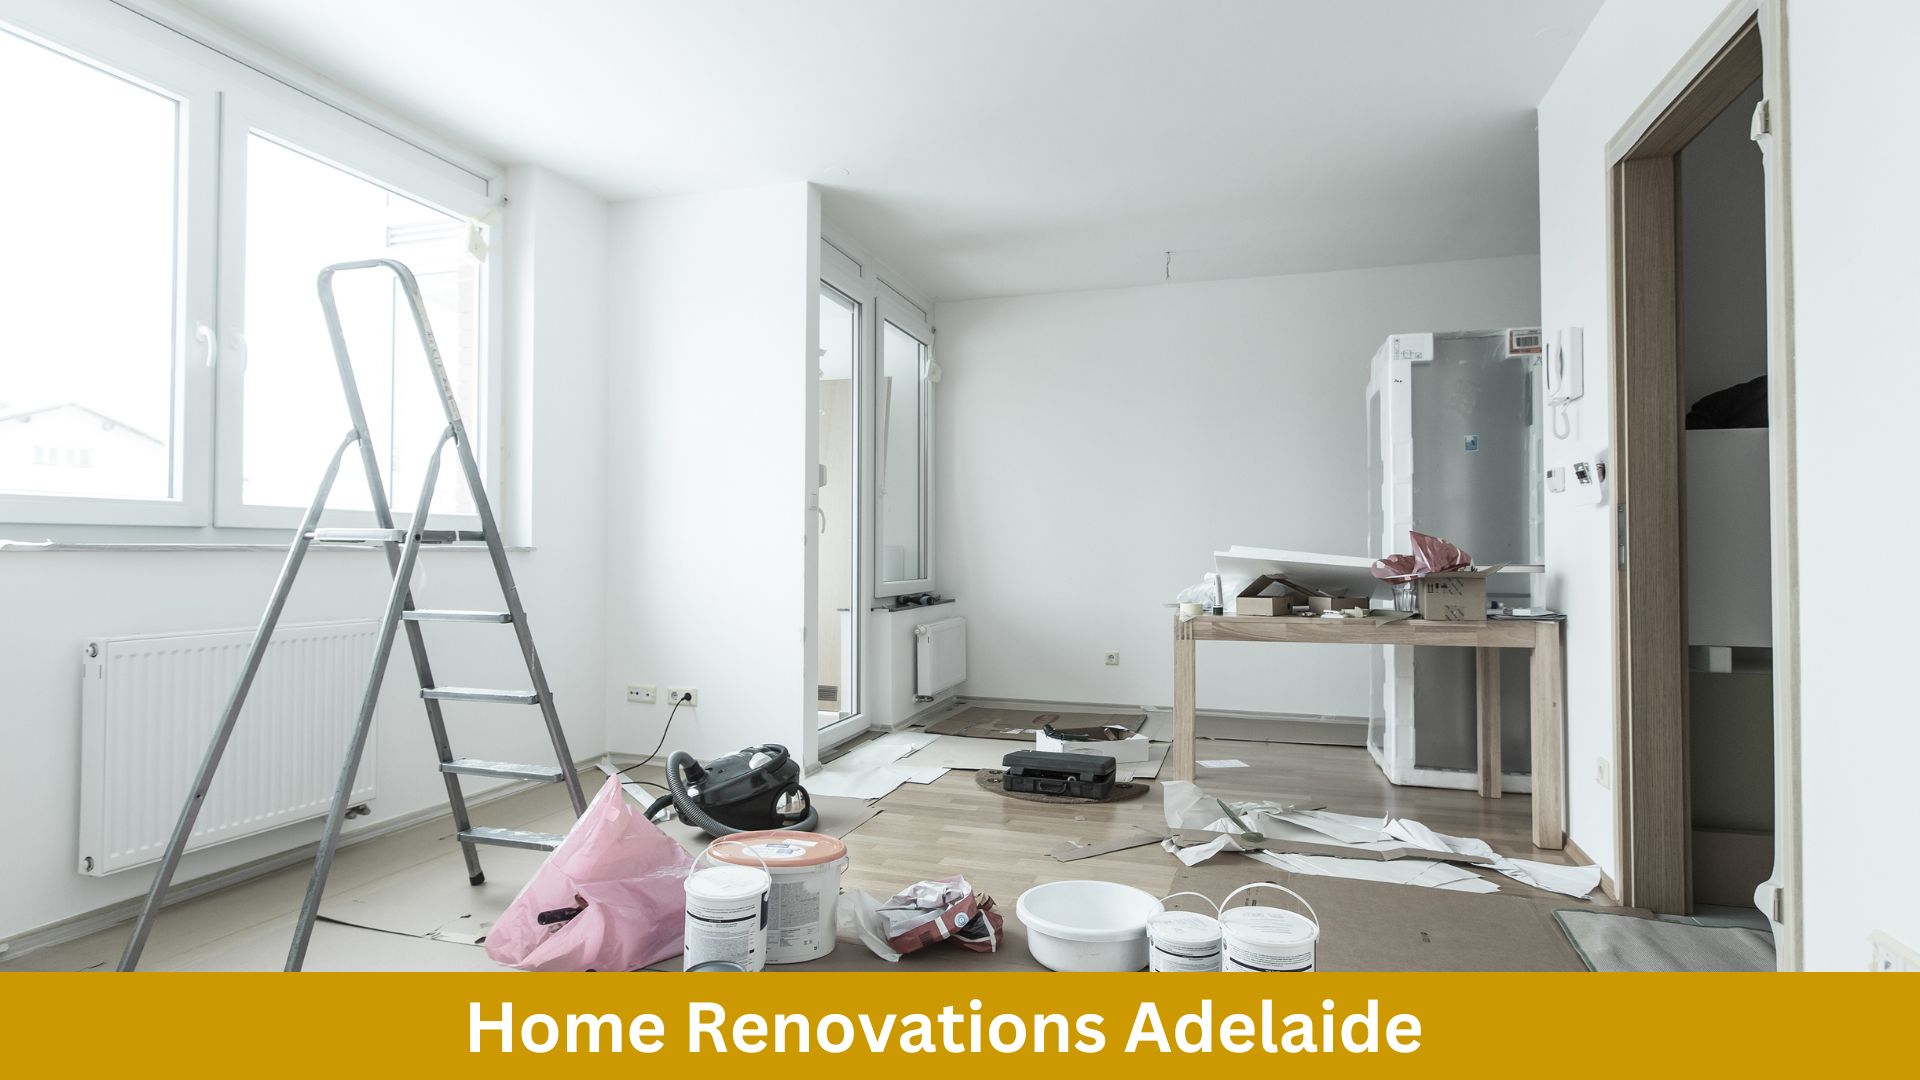 Home Renovations Adelaide by Austral Constructions 